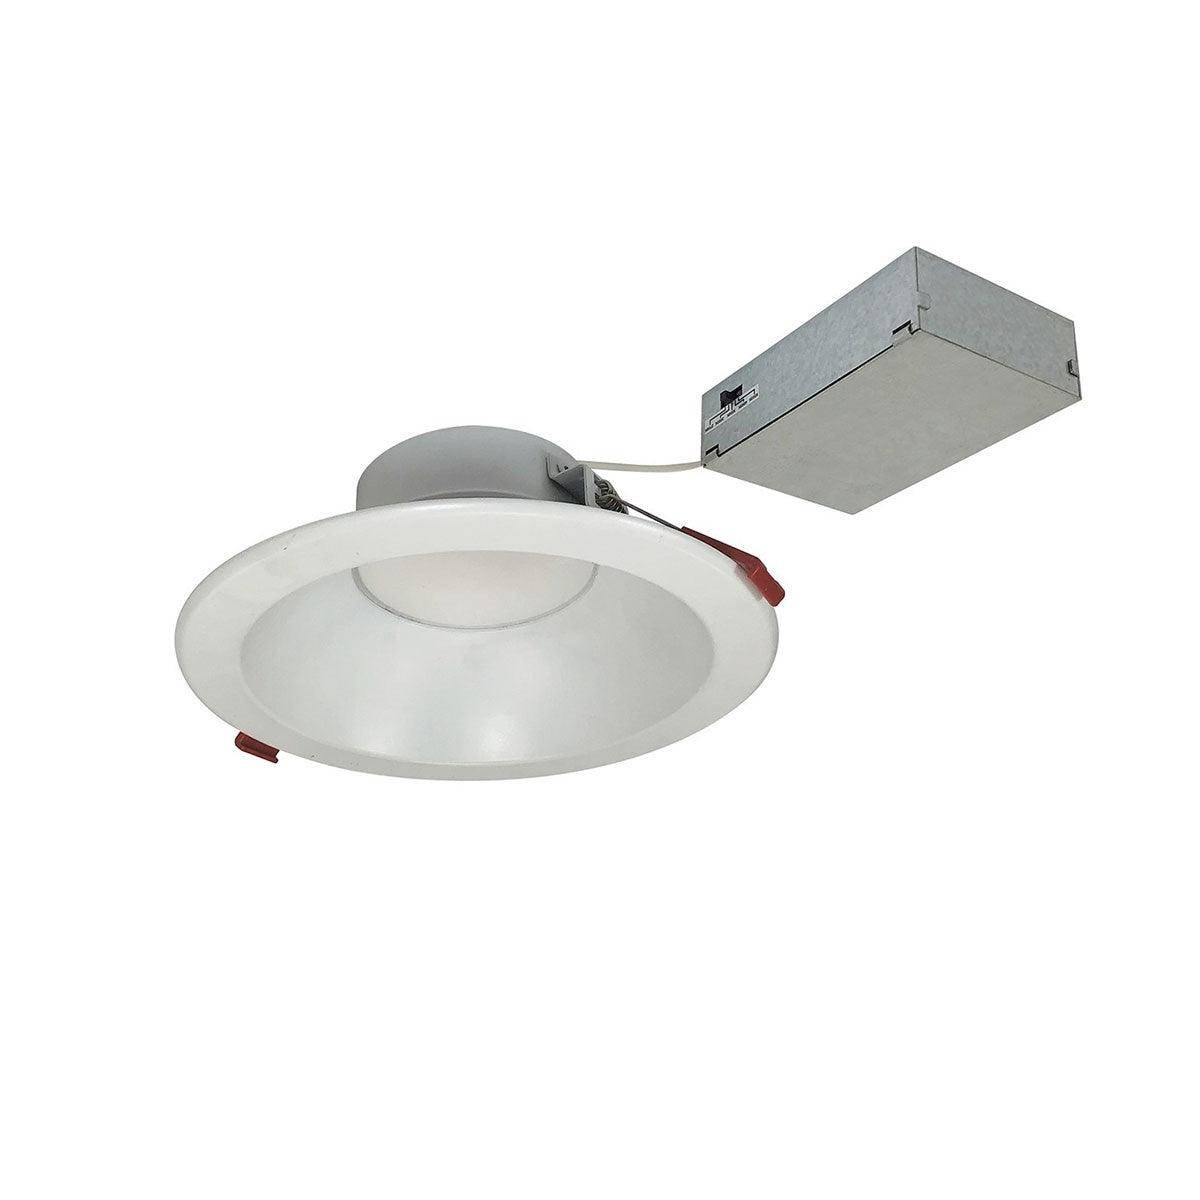 Theia 6 Inch Canless LED Recessed Light, 15 Watt, 1400 Lumens, Selectable CCT, 2700K to 5000K, Matte Powder White Finish